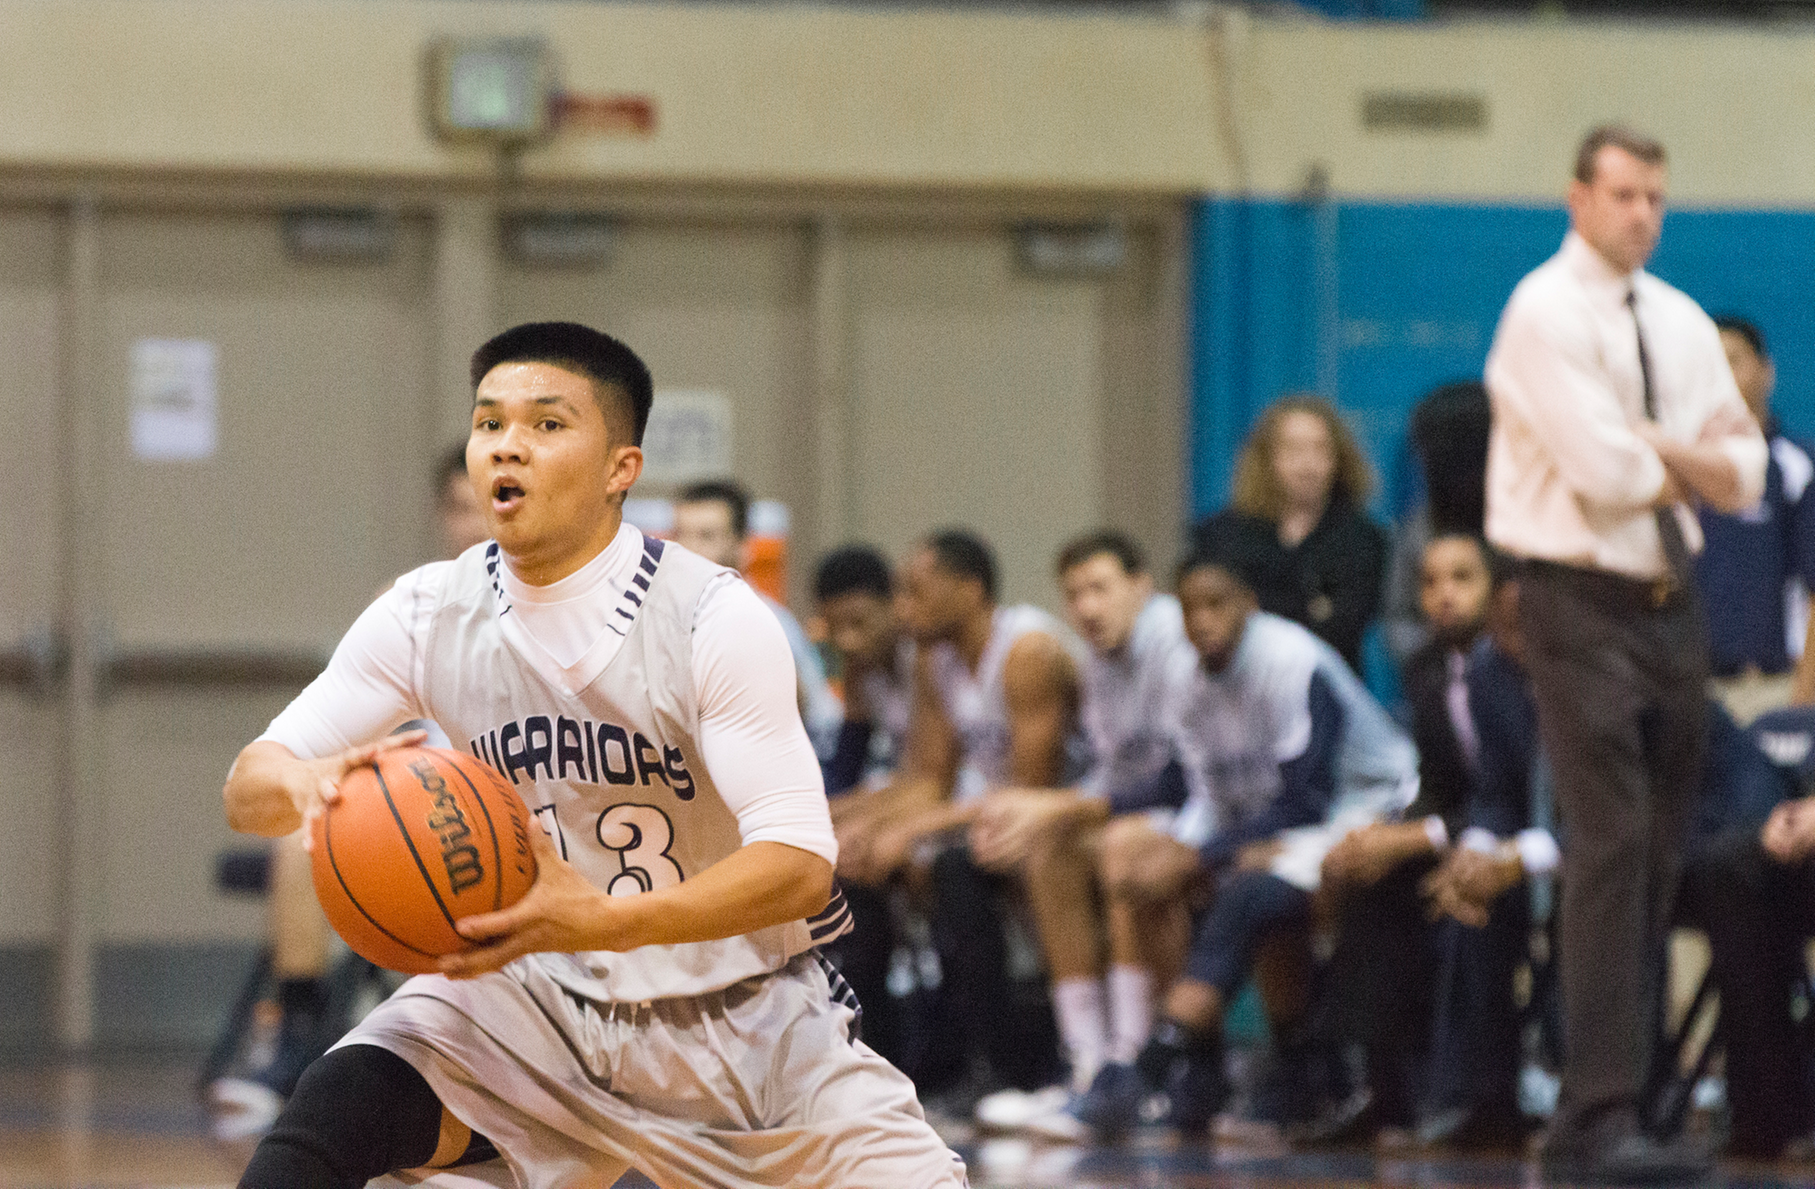 Men’s Basketball Continues Conference Play With Loss to Long Beach City